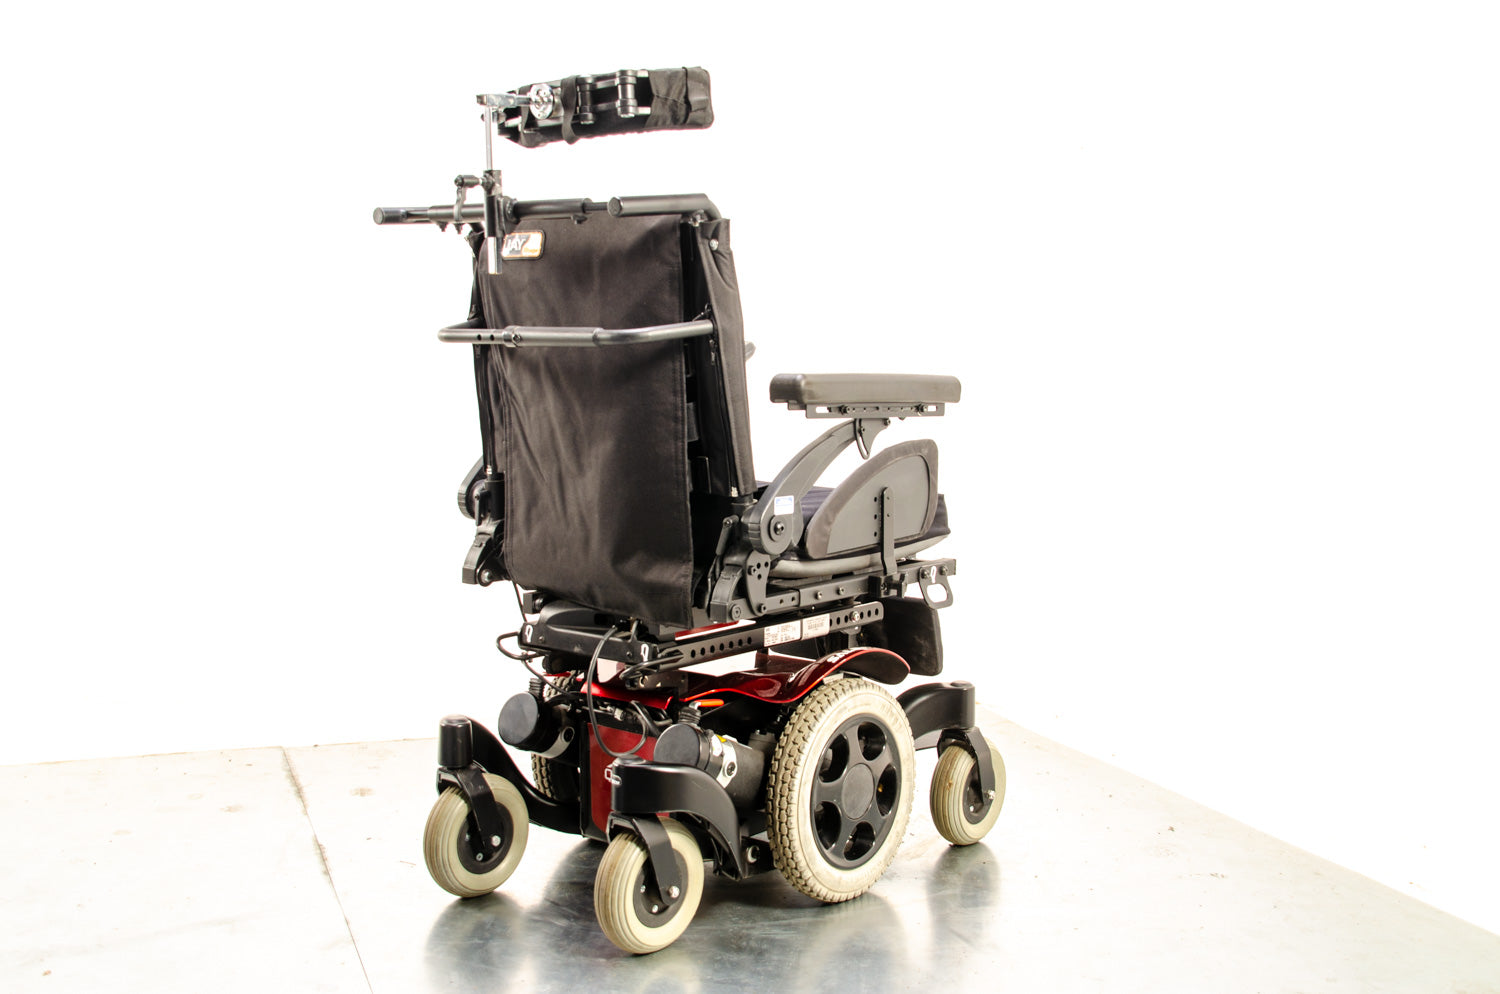 2016 Sunrise Medical Quickie Salsa M2 Mini Used Electric Wheelchair Powerchair Powered Tilt Red 13639